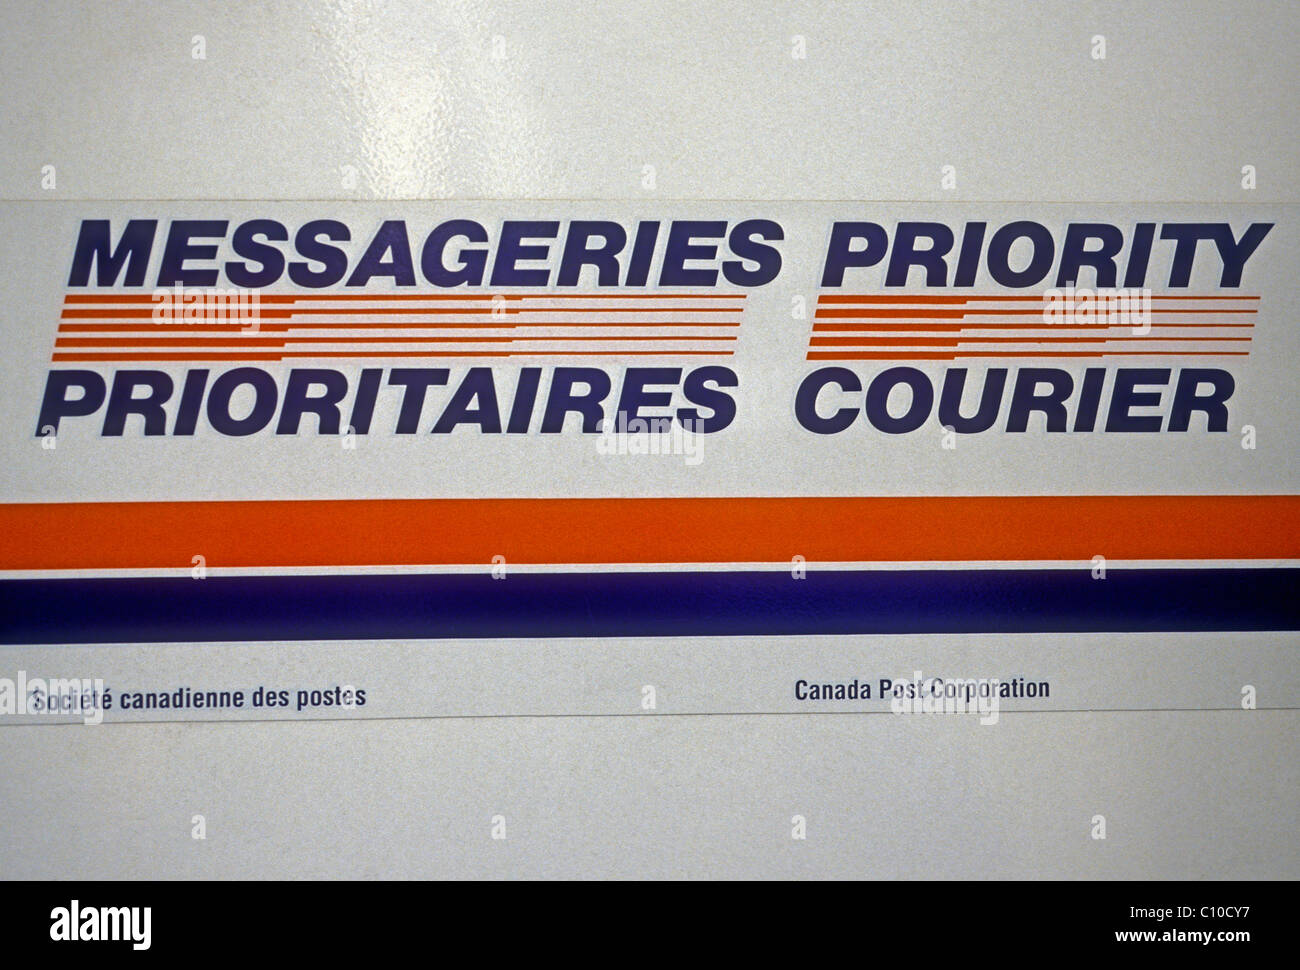 postal service, messageries prioritaires, priority courier, bilingual sign, city of Montreal, Montreal, Quebec Province, Canada, North America Stock Photo